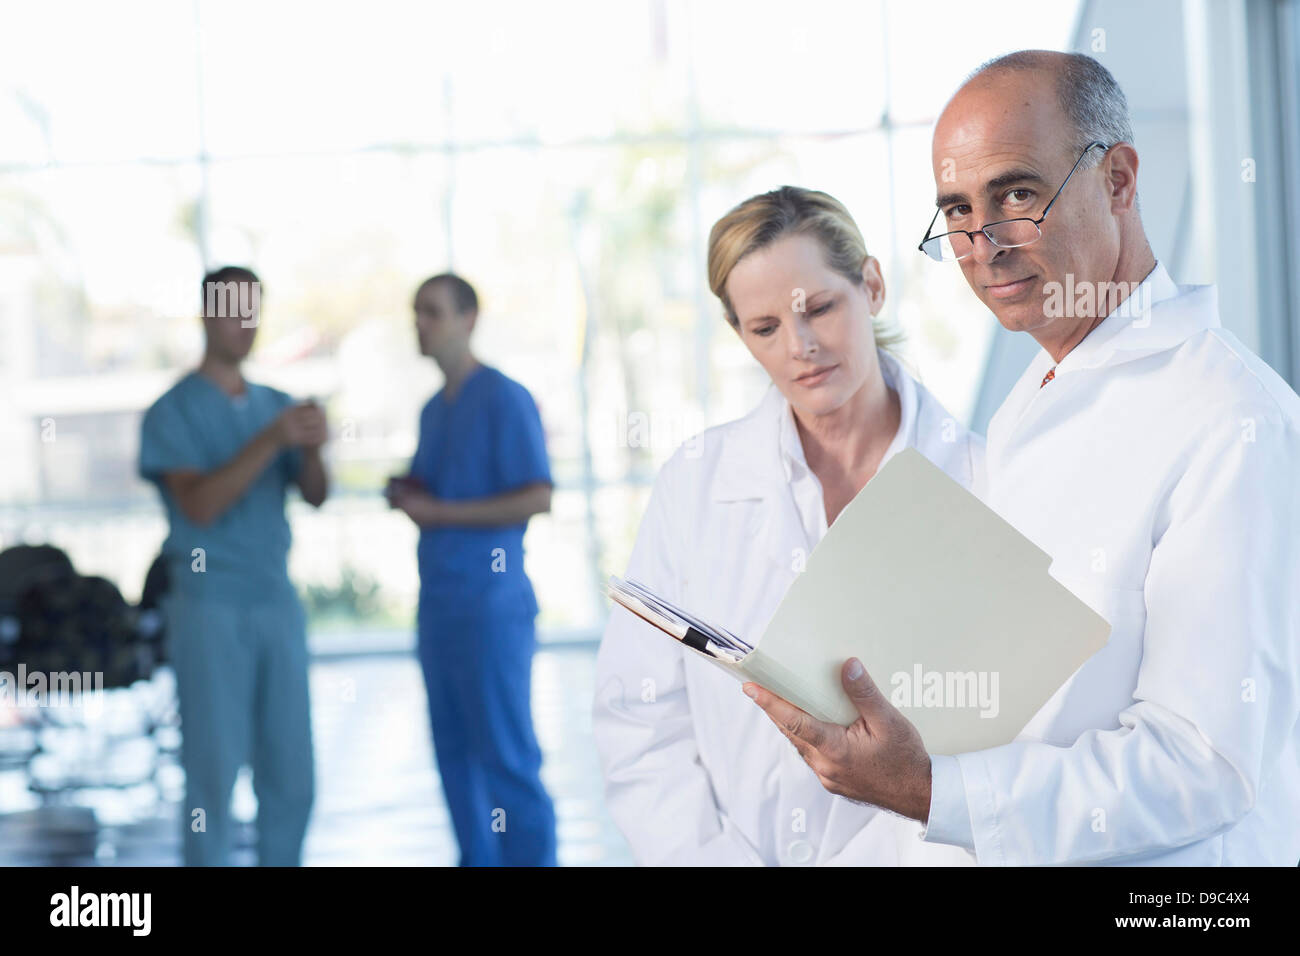 Two doctors discussing medical records Stock Photo